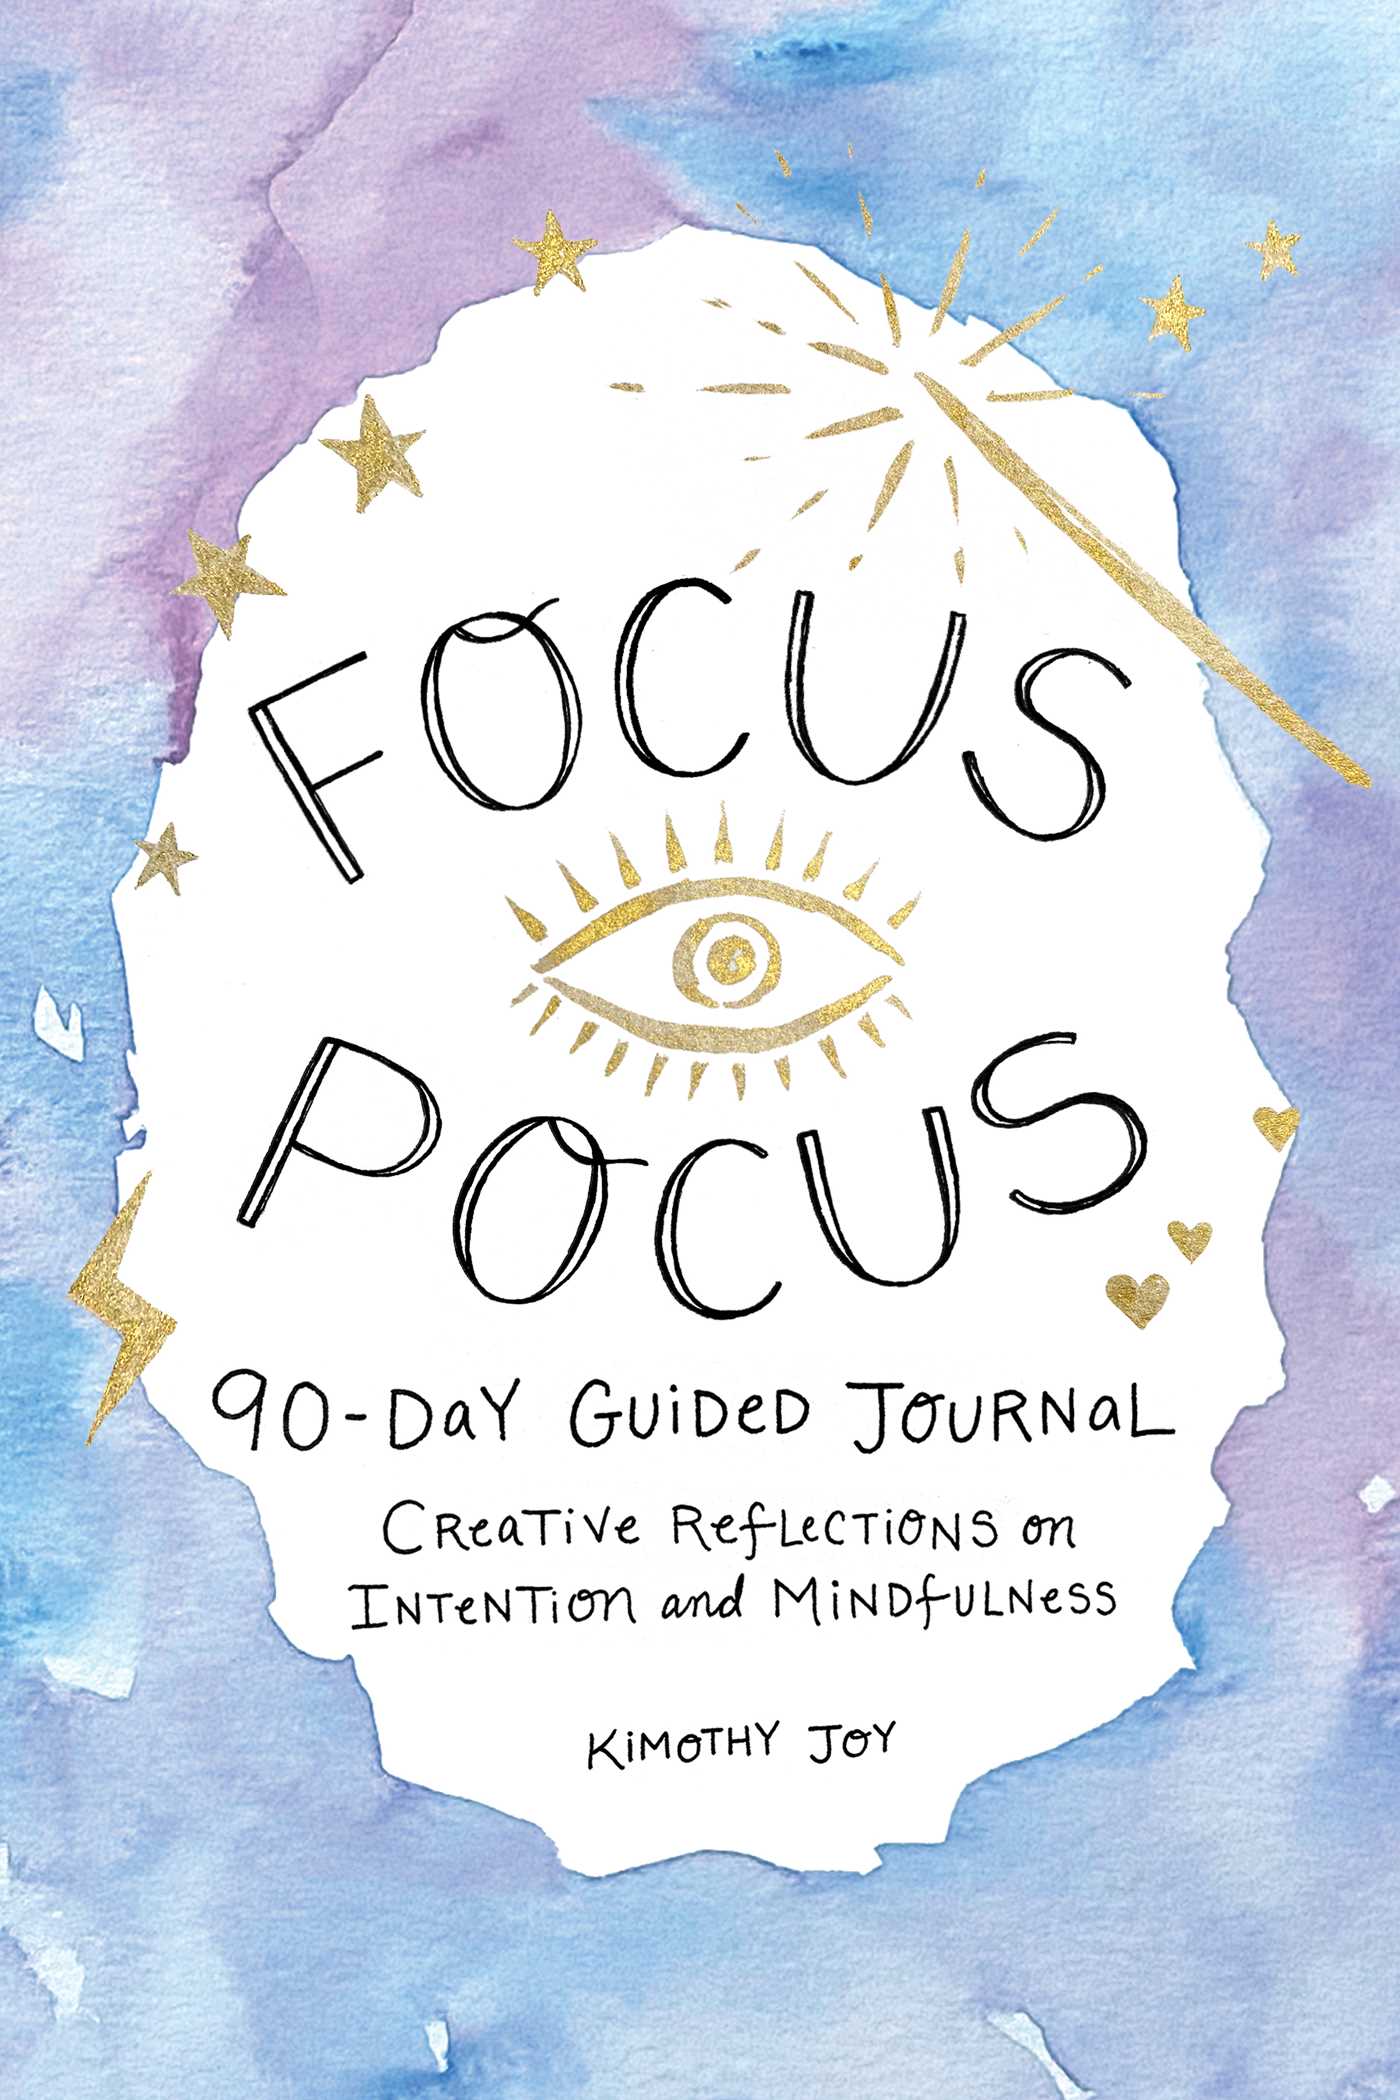 Focus Pocus 90-Day Guided Journal : Creative Reflections for Intention and Mindfulness | Joy, Kimothy